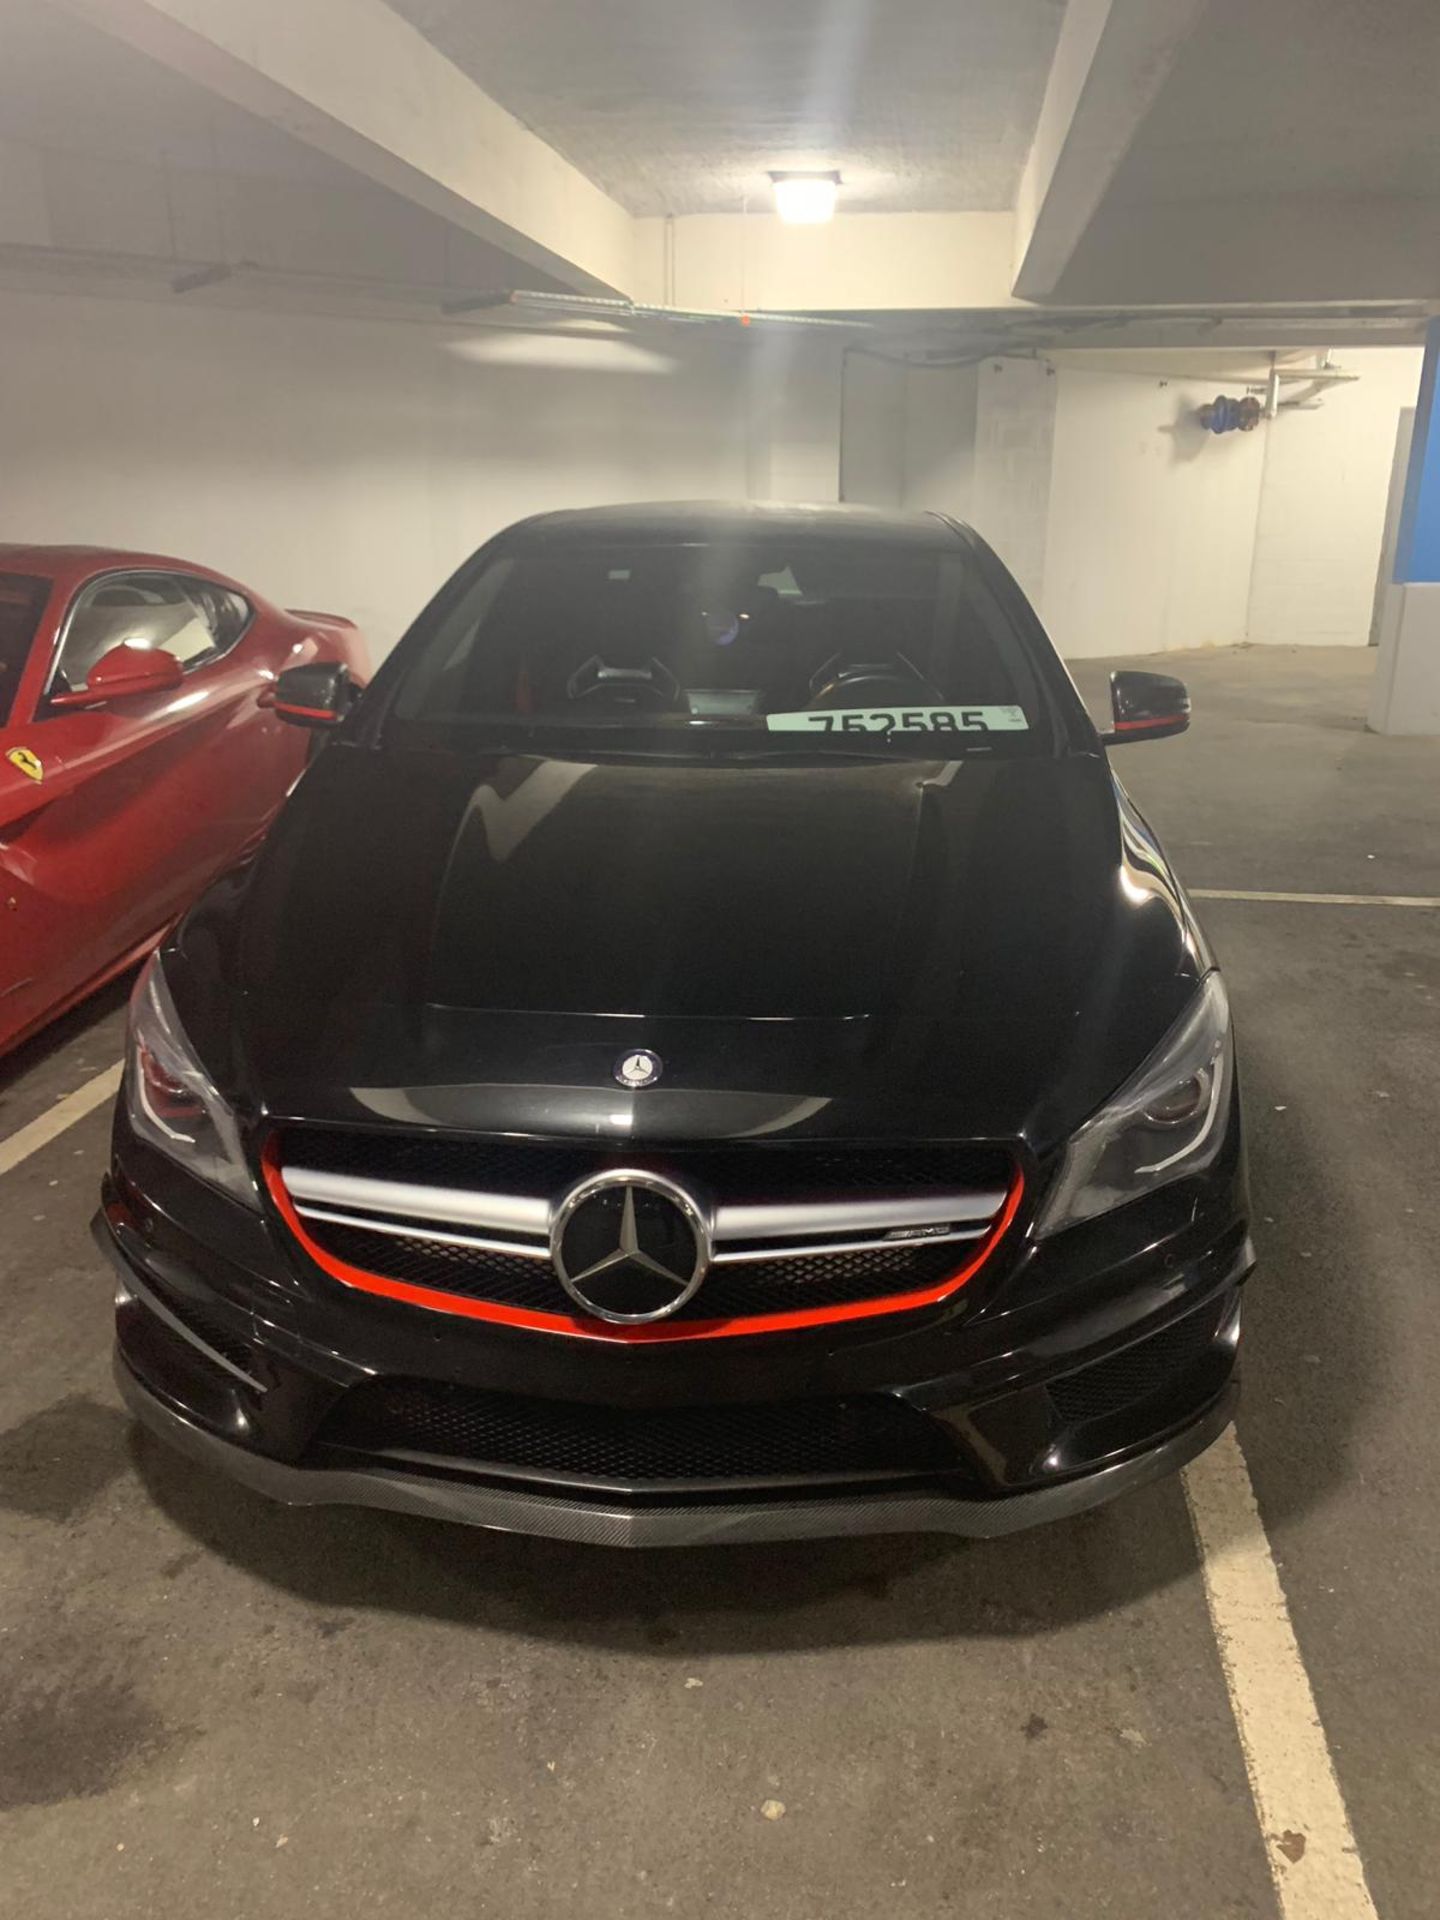 RARE 2015 MERCEDES-BENZ CLA45 AMG 4 MATIC SPECIAL EDITION 1, 355 BHP, 40,000KM / 25,000 MILES - Image 2 of 15